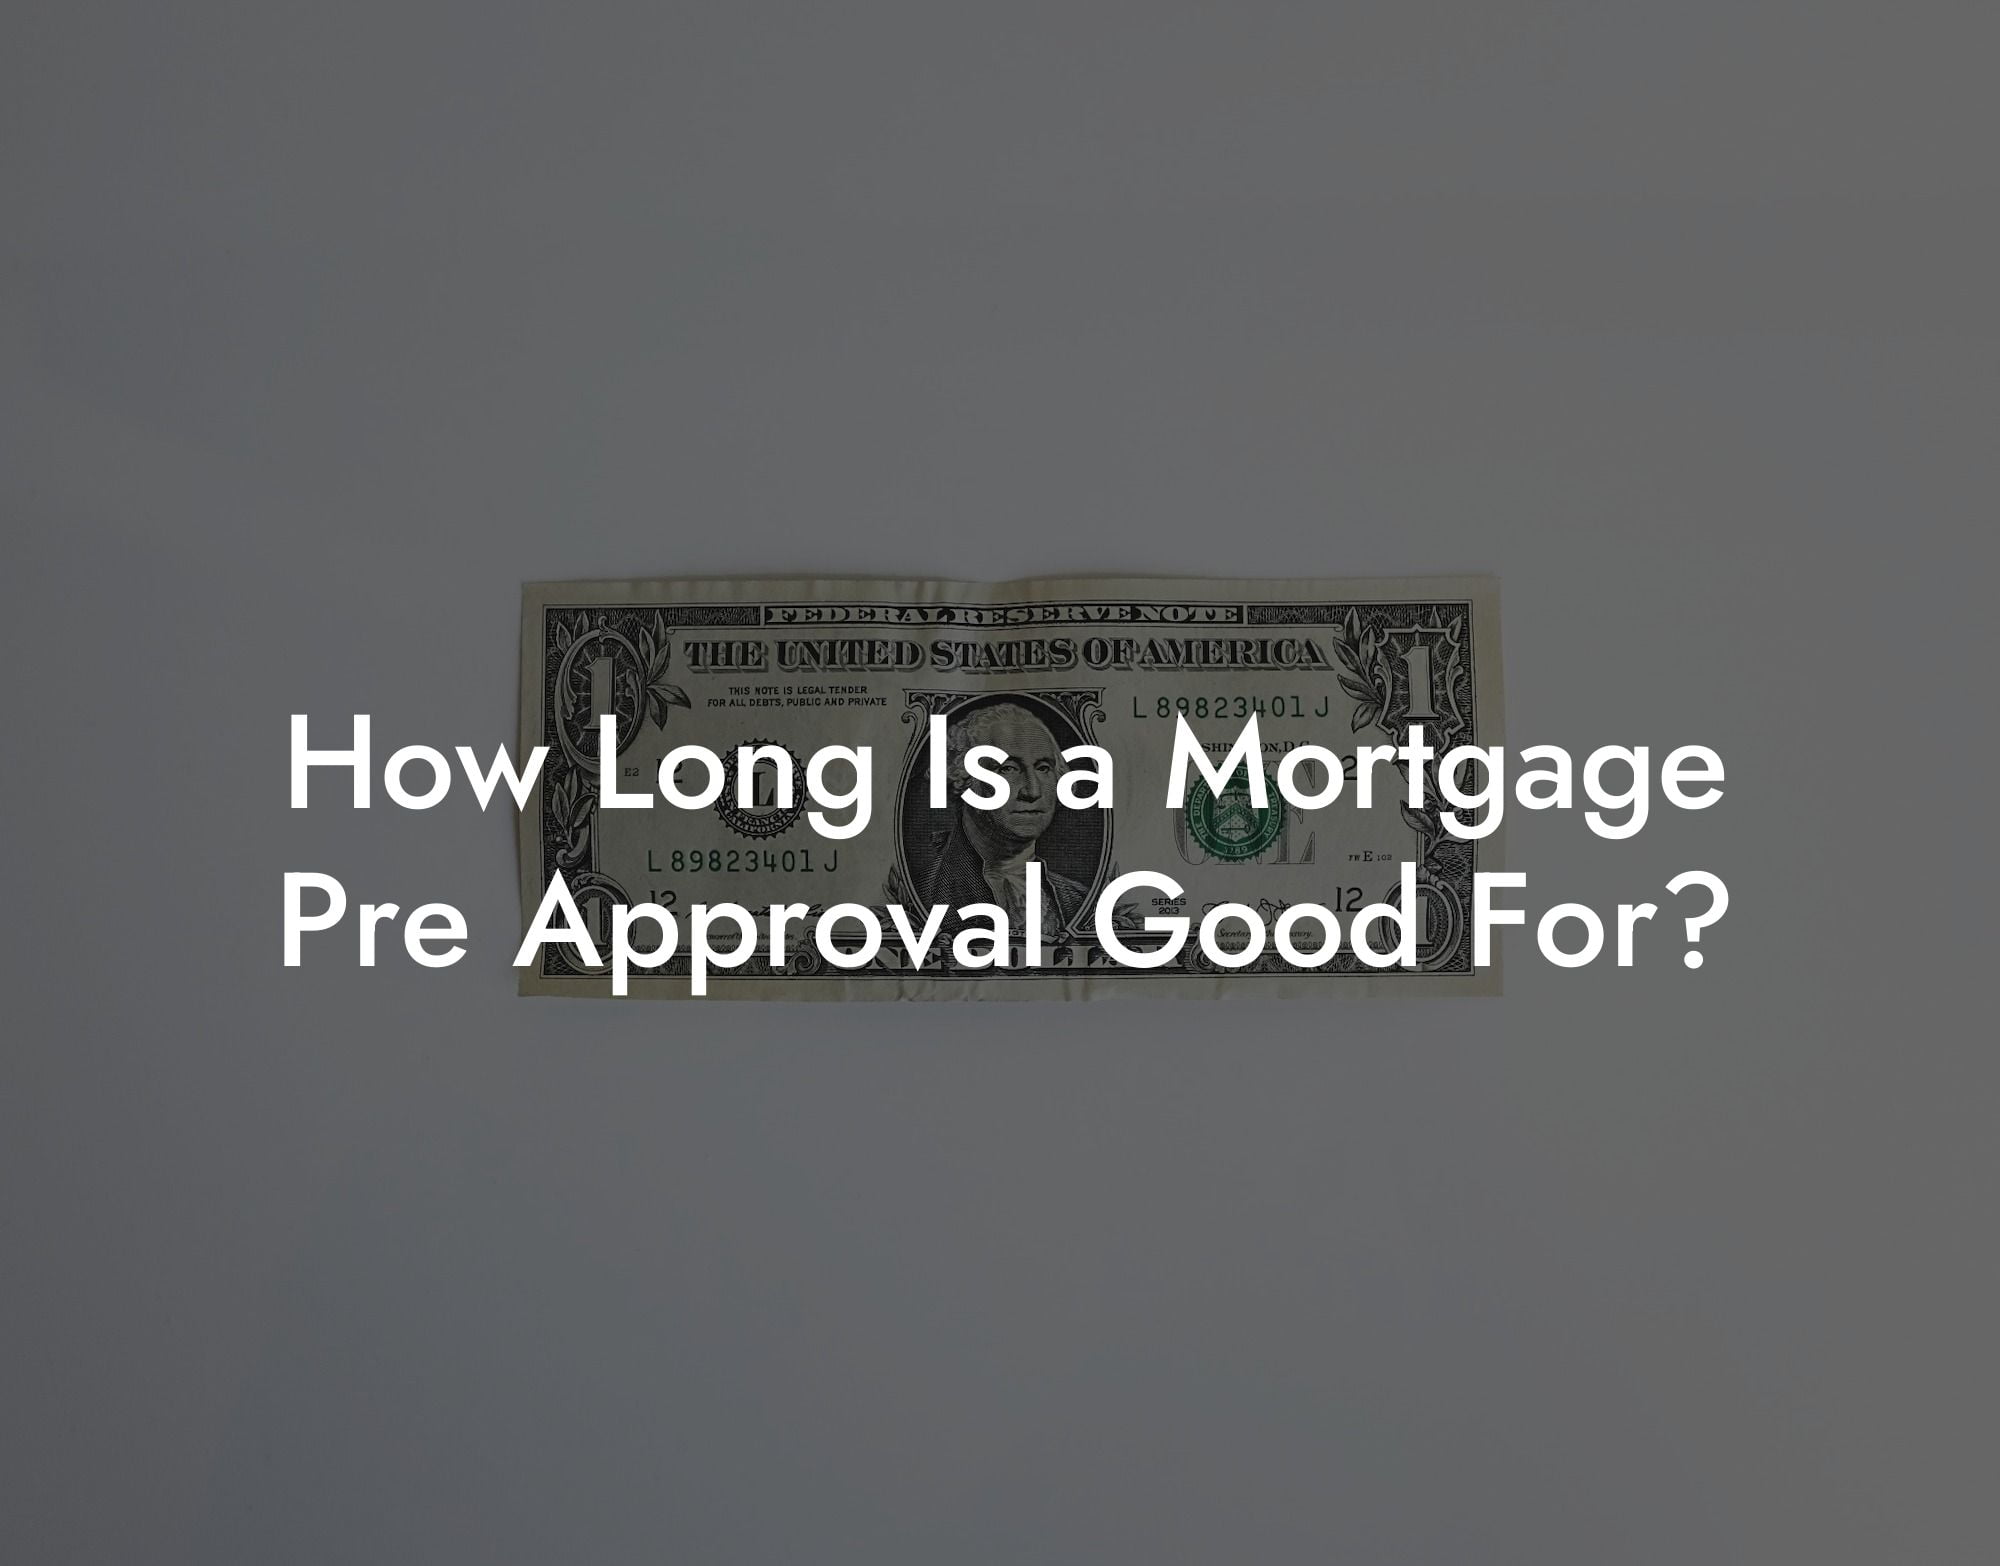 How Long Is a Mortgage Pre Approval Good For?